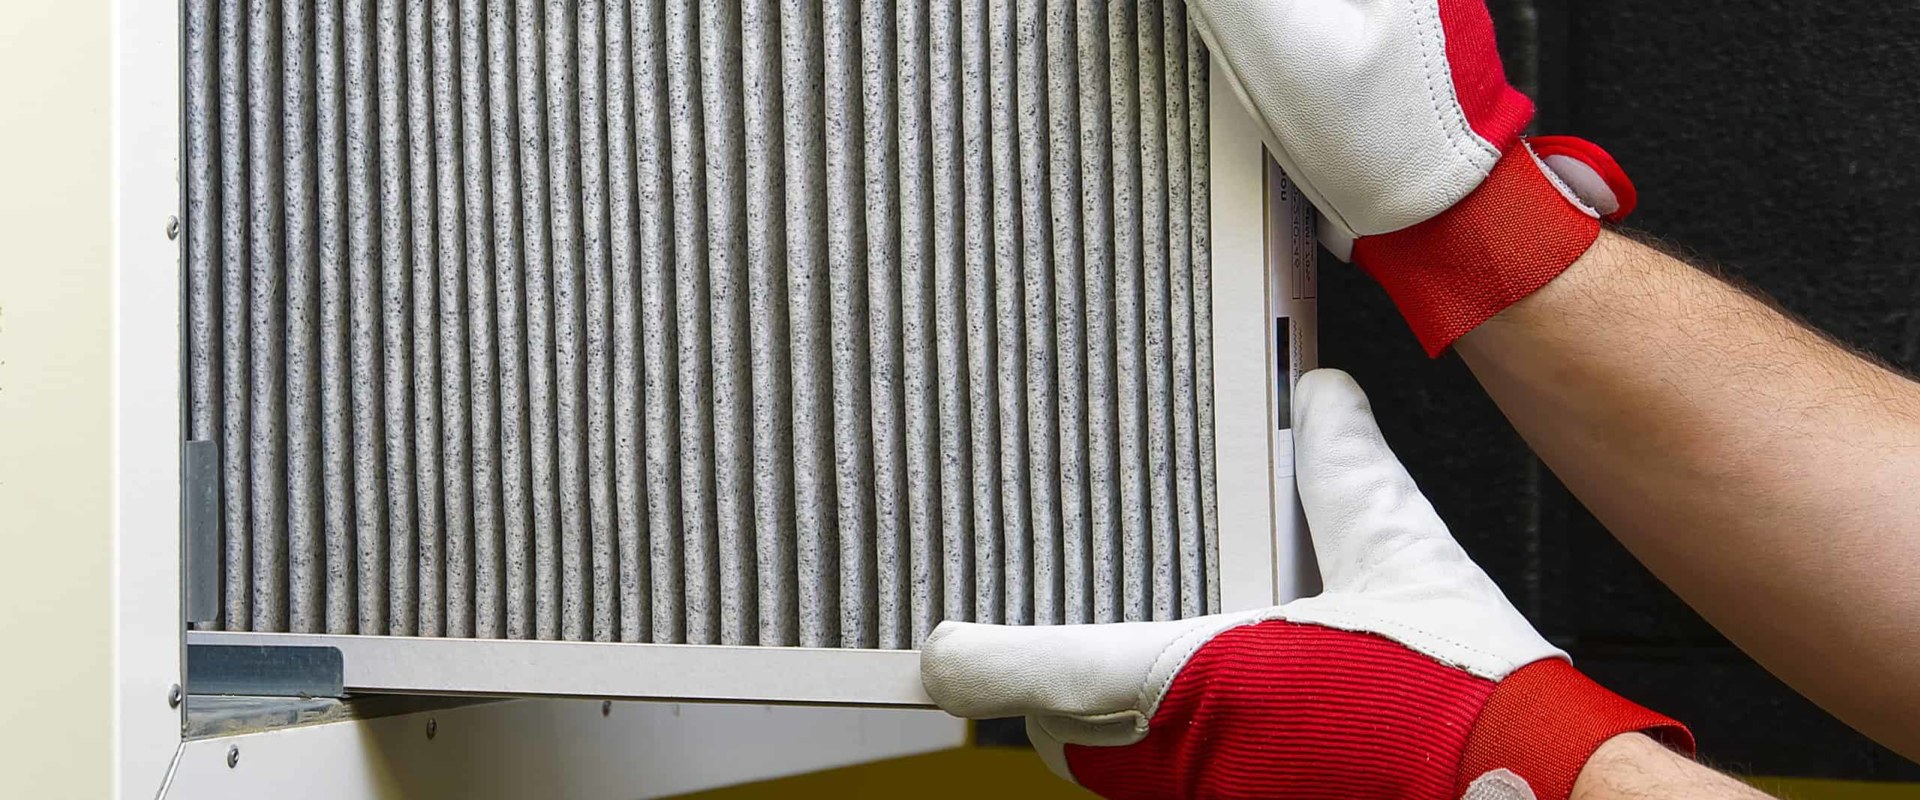 The Importance of Regularly Changing Your Air Filters: An Expert's Perspective